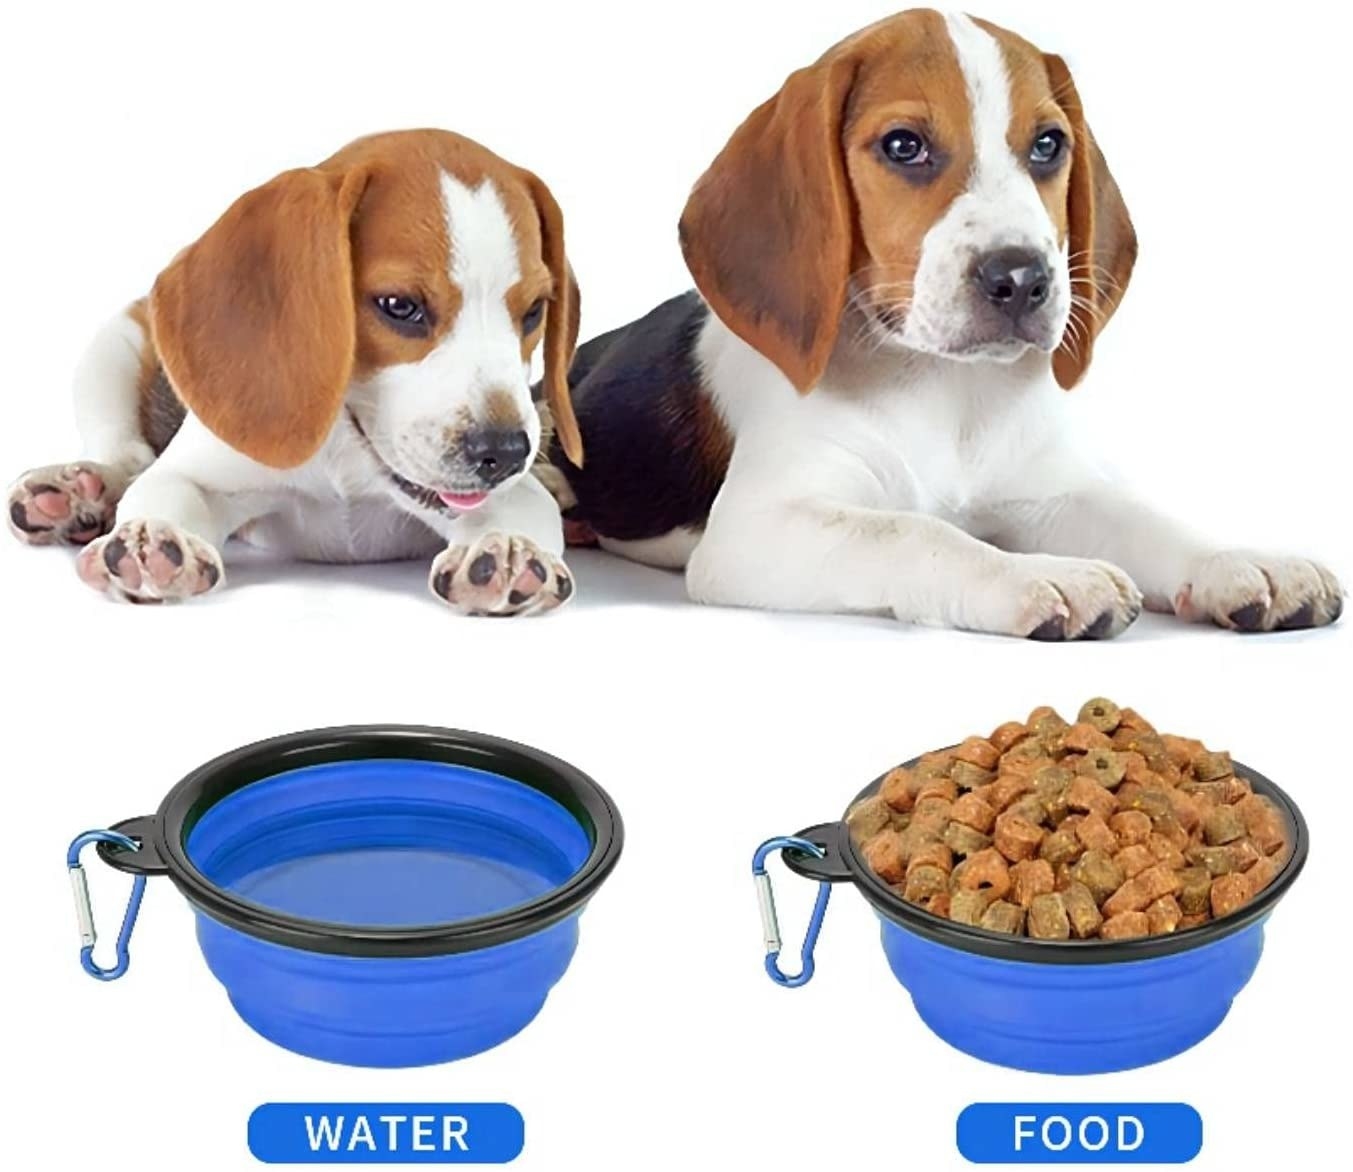 Two dogs in front of bowls of food and water